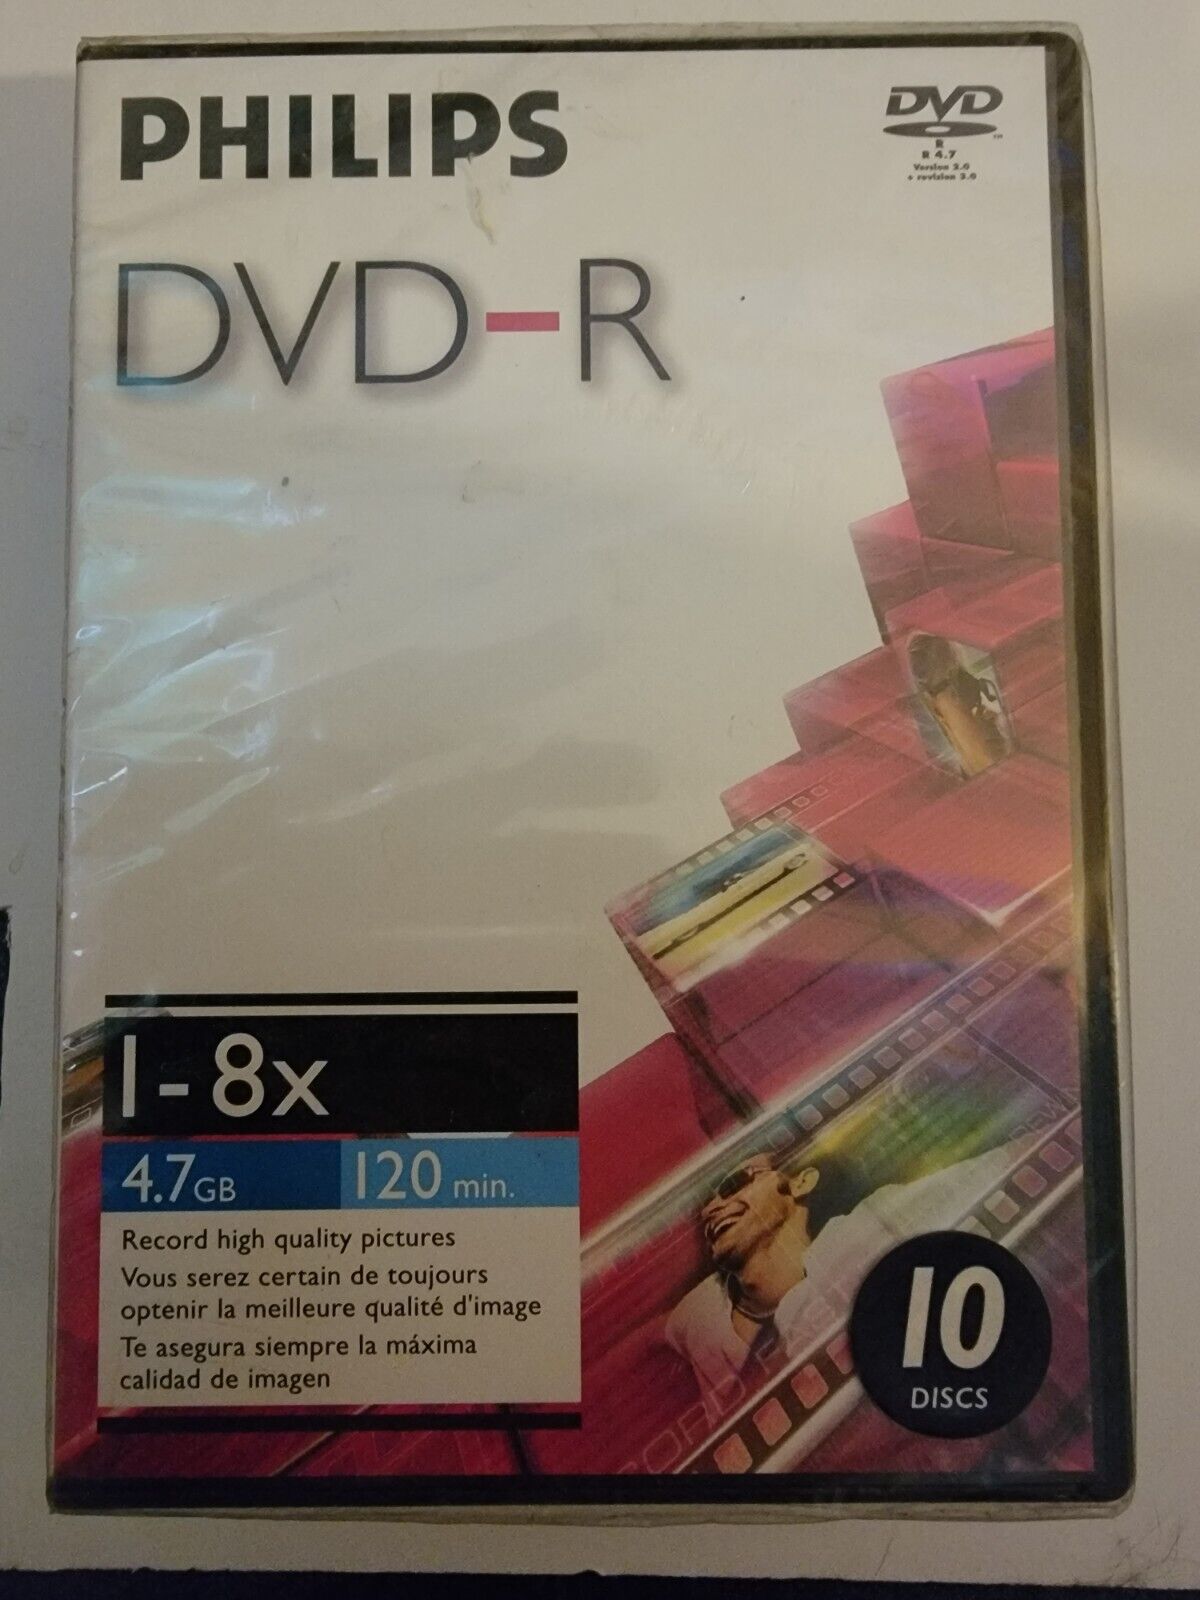 10-Count Phillips DVD-R / 1-8X